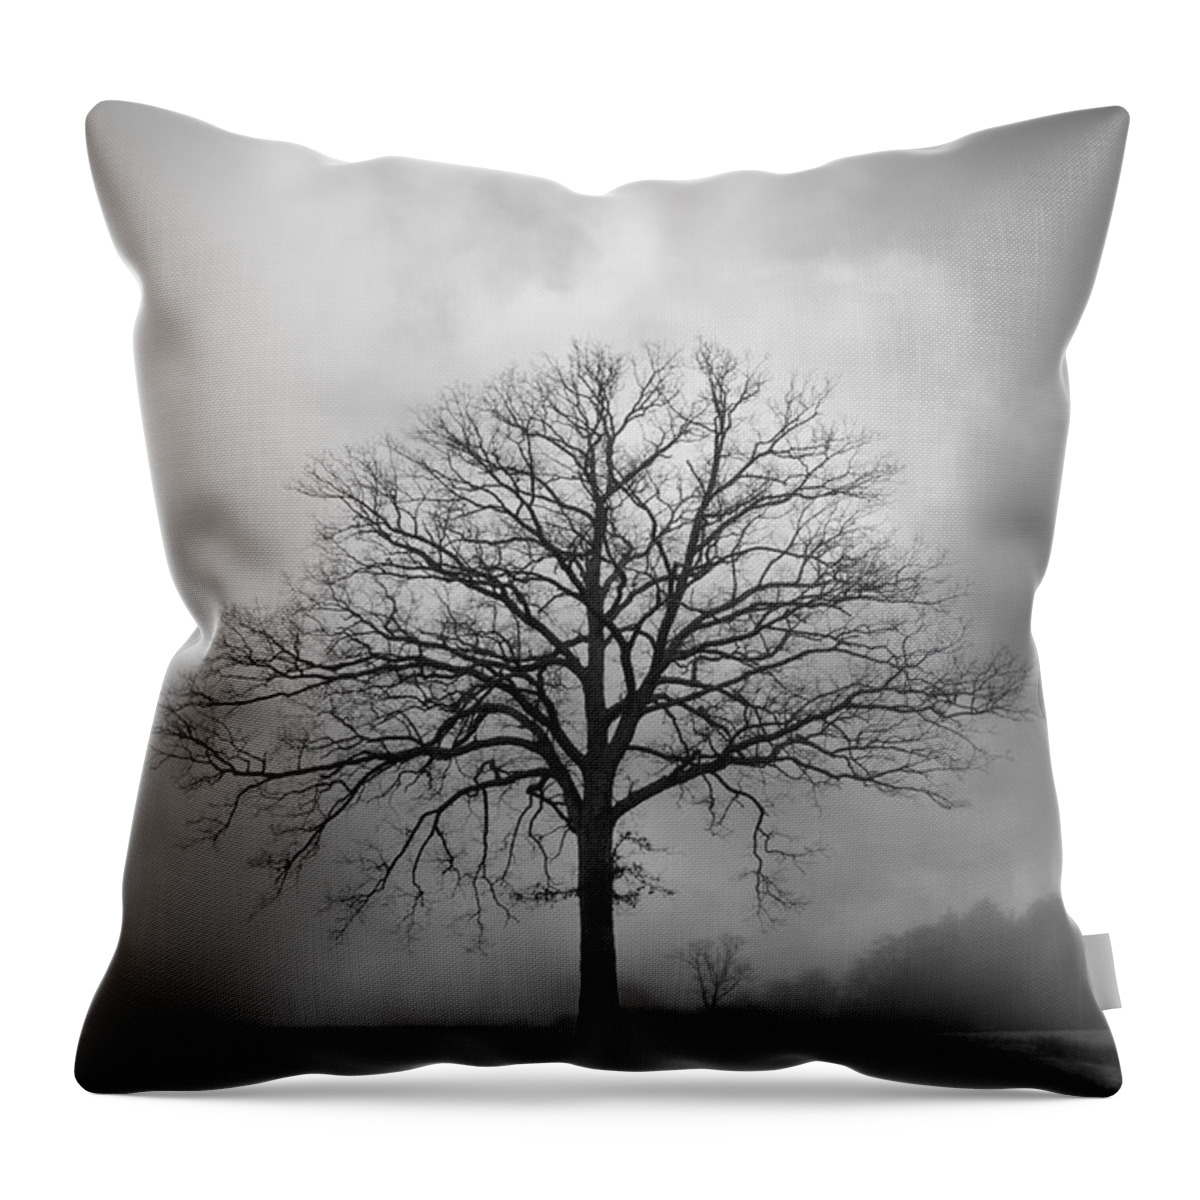 Tree Throw Pillow featuring the photograph Bare Tree And Clouds BW by David Gordon